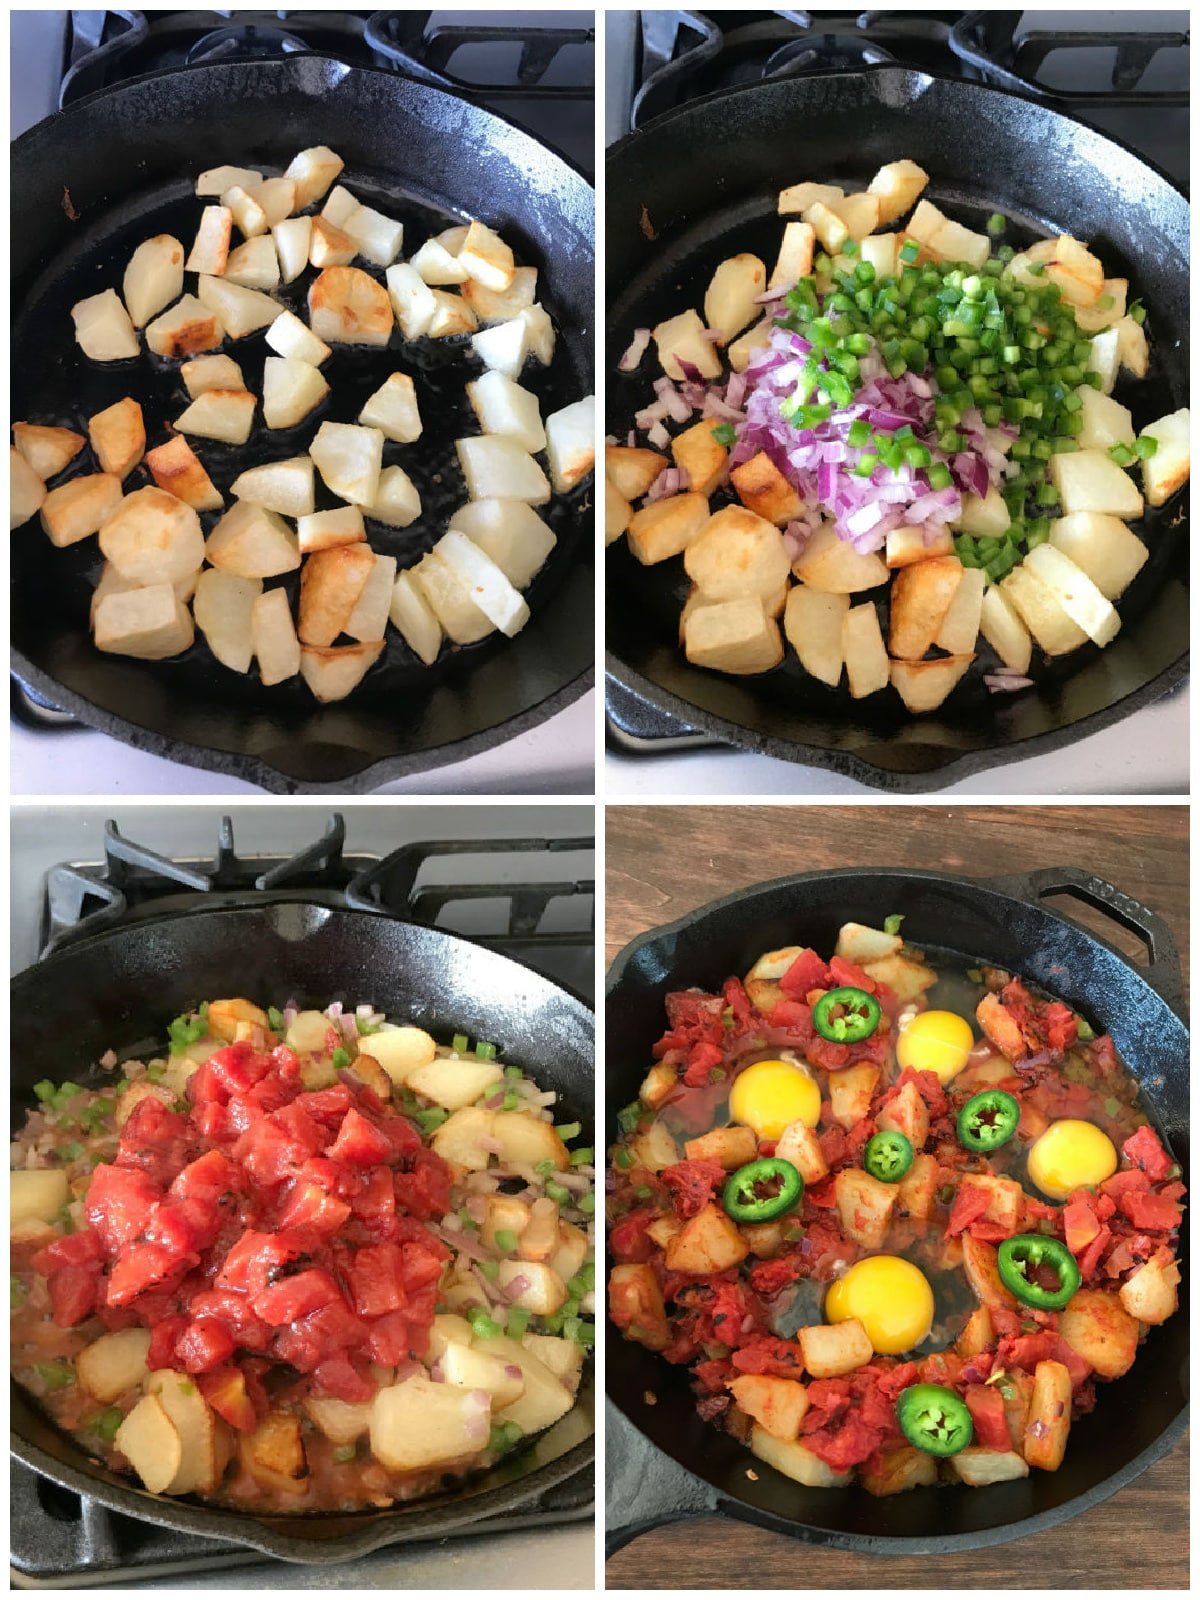 A collage of images showing instructions to make the potato egg breakfast recipe.